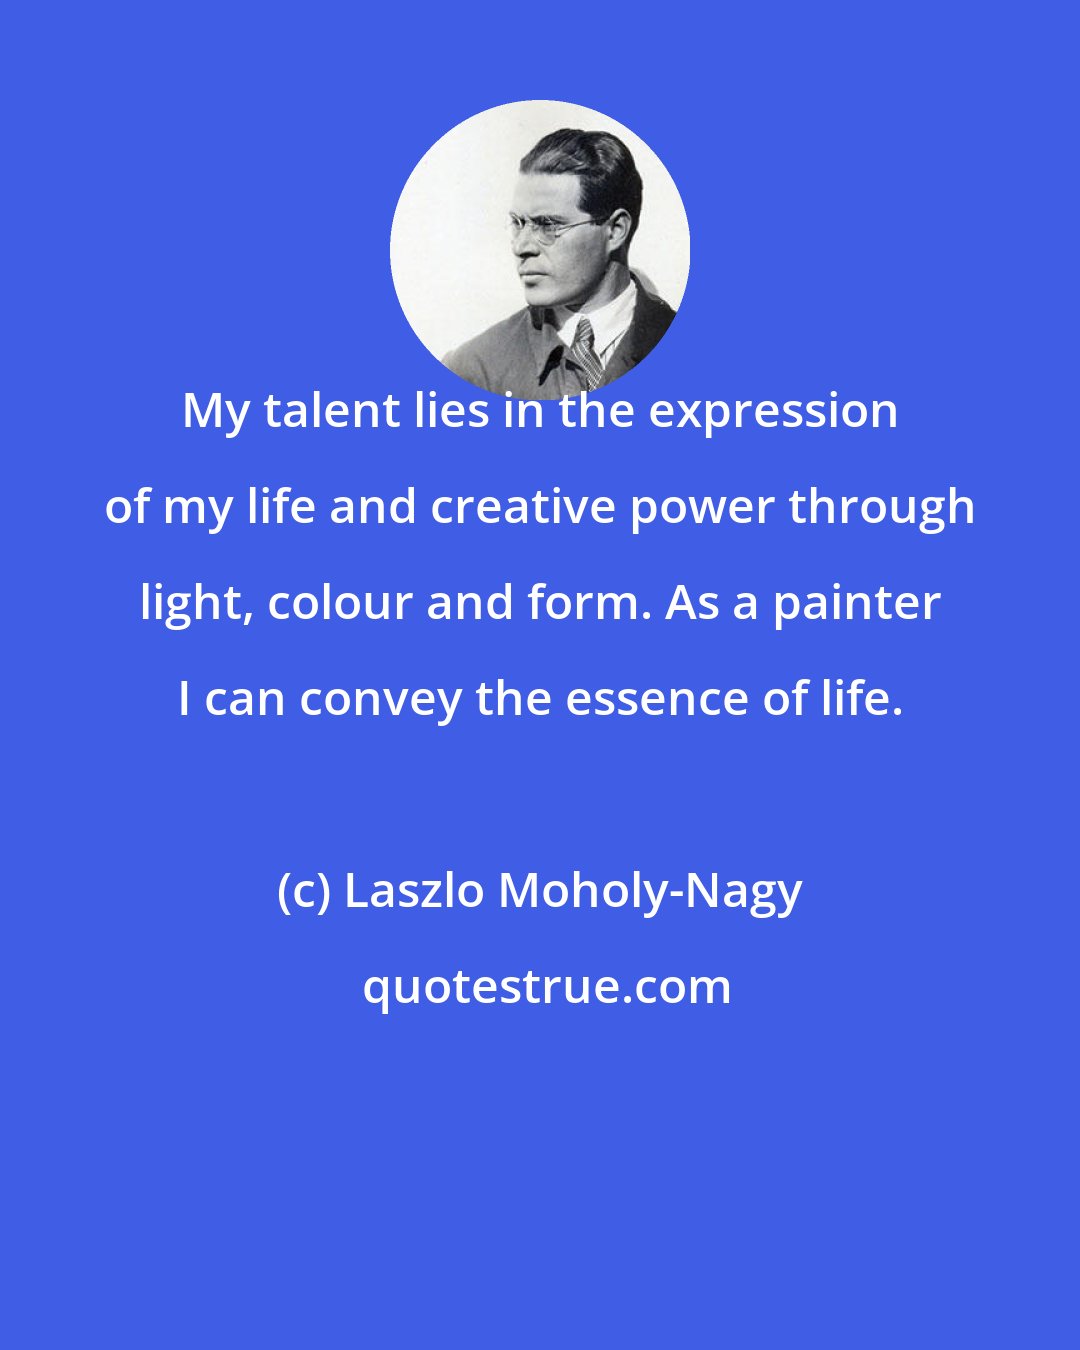 Laszlo Moholy-Nagy: My talent lies in the expression of my life and creative power through light, colour and form. As a painter I can convey the essence of life.